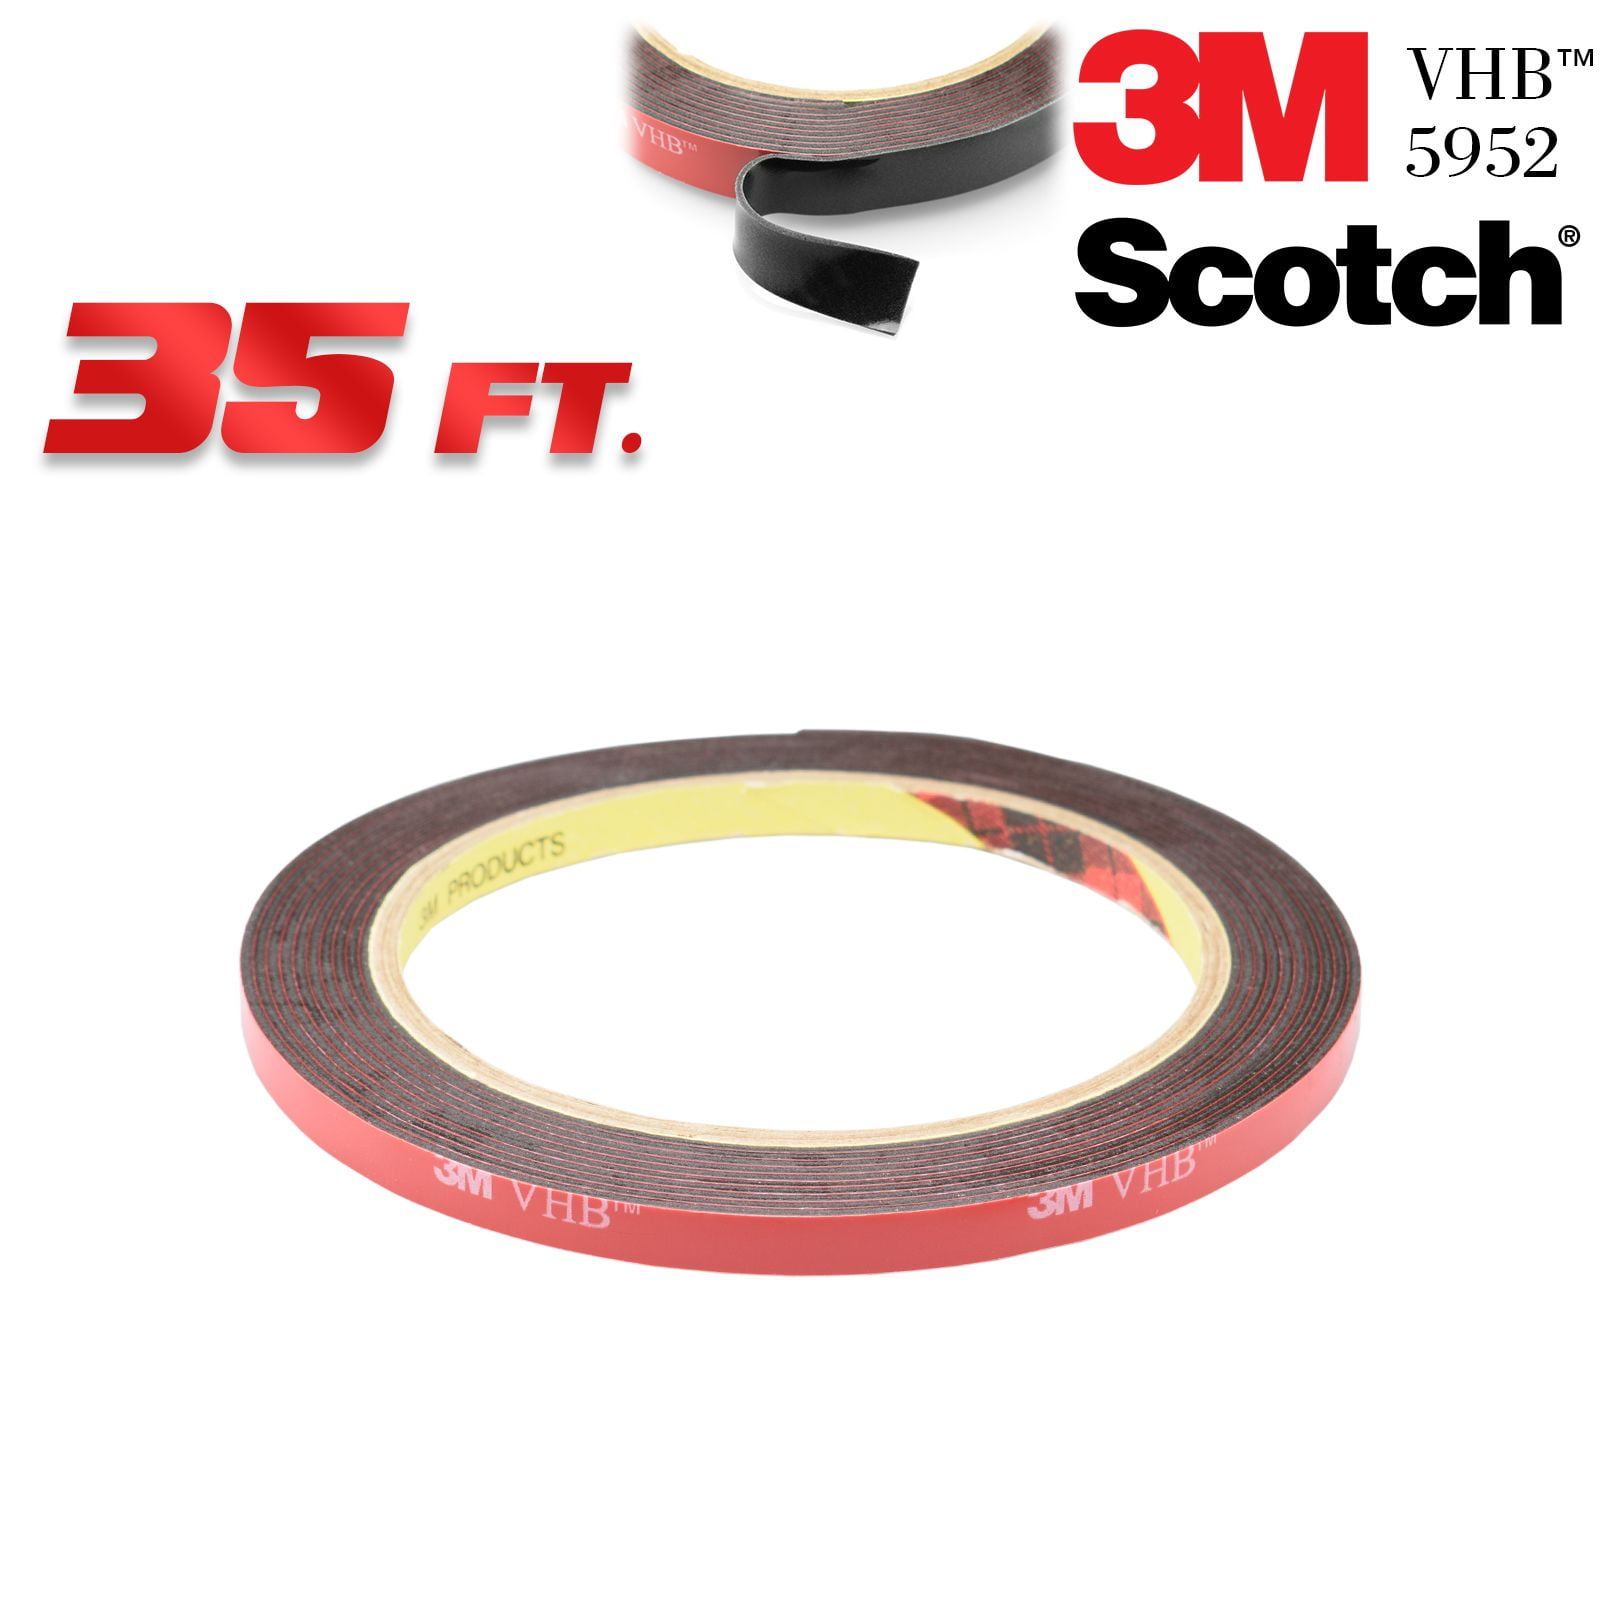 3M™ Brand6mm/3m Auto Car Acrylic Foam Double Sided Attachment Adhesive Tape 